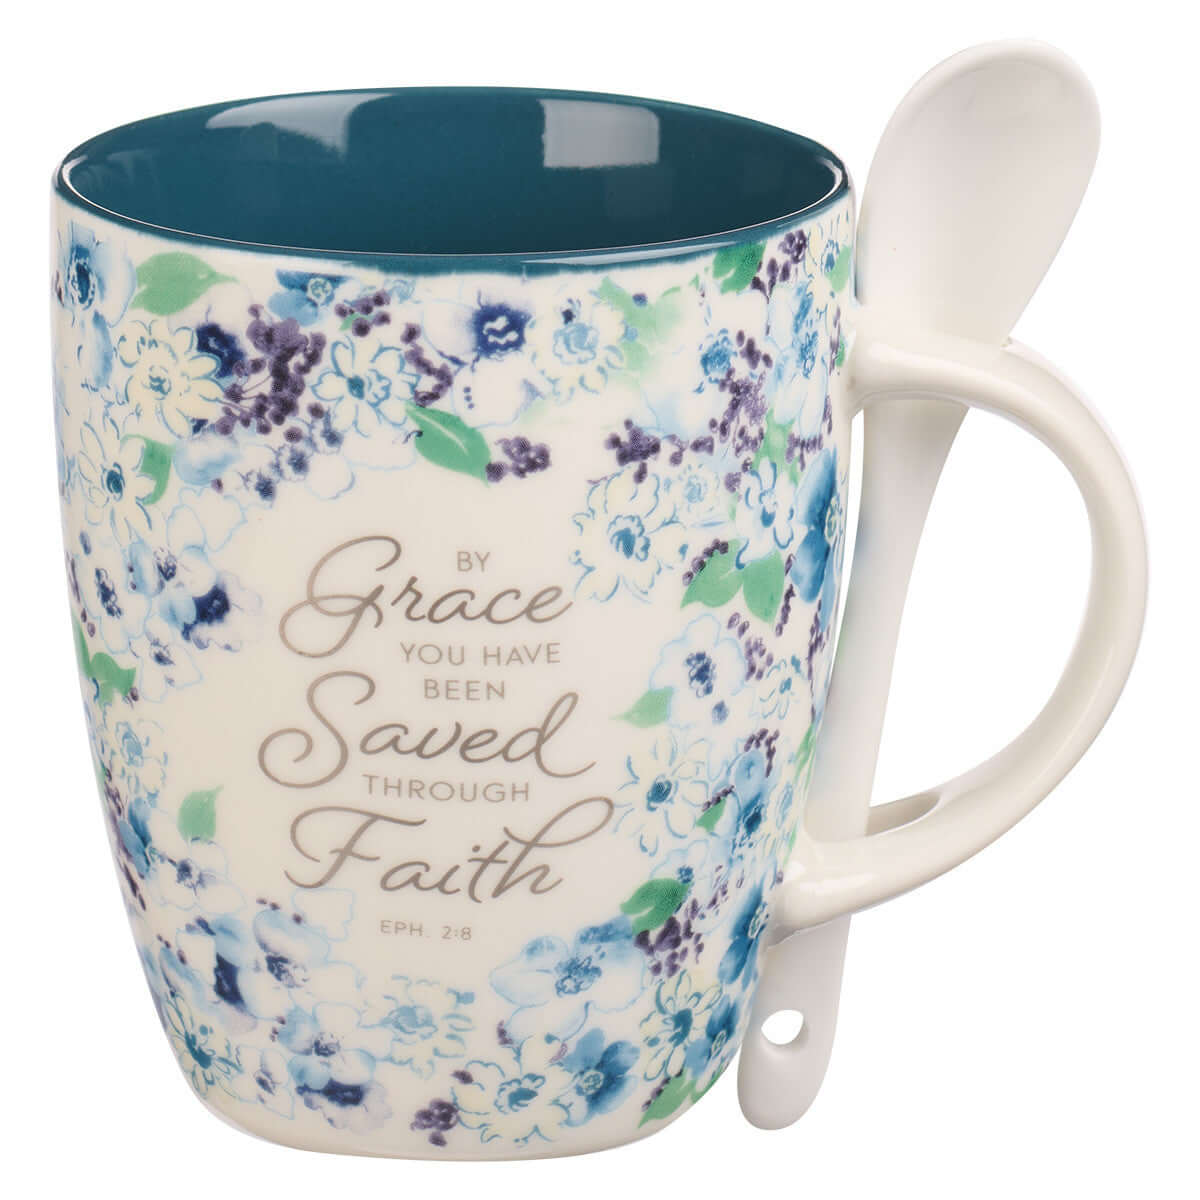 Saved by Grace Blue Floral Ceramic Coffee Mug with Spoon - Ephesians 2:8 | 2FruitBearers